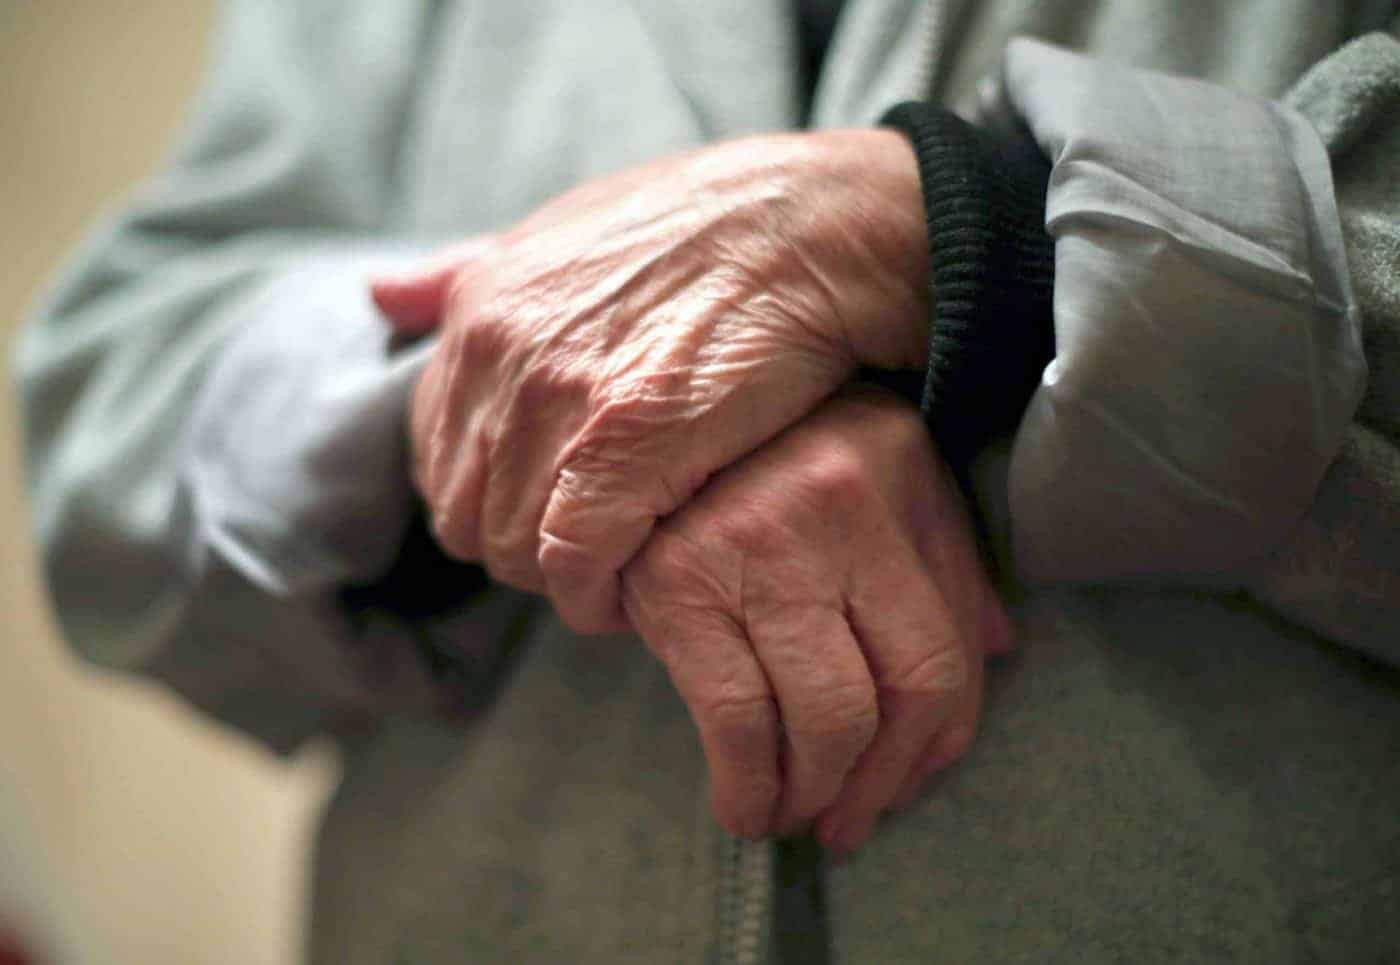 Tory Minister forced to backtrack on care homes policy claims